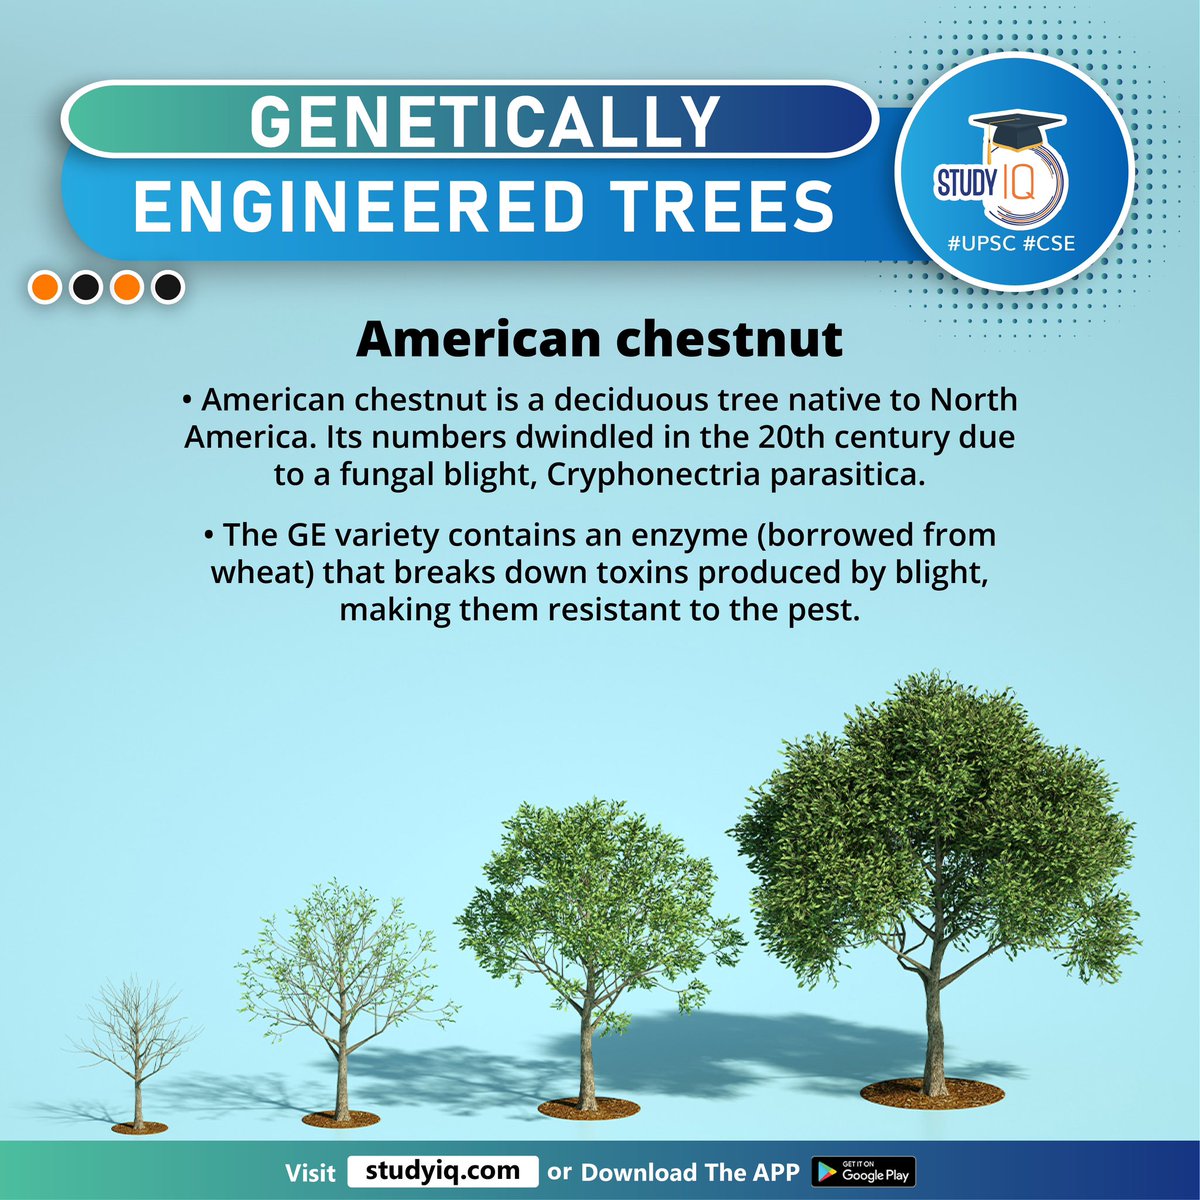 Genetically Engineered Trees

#geneticallyengineeredtrees #engineeredtrees #unitedstates #ge #americanchestnuttree #us #geversion #geforest #treespecies #forests #china #commercialplantations #geinsect #poplartrees #canada #germany #india #rubbertrees #northamerica #fungalblight